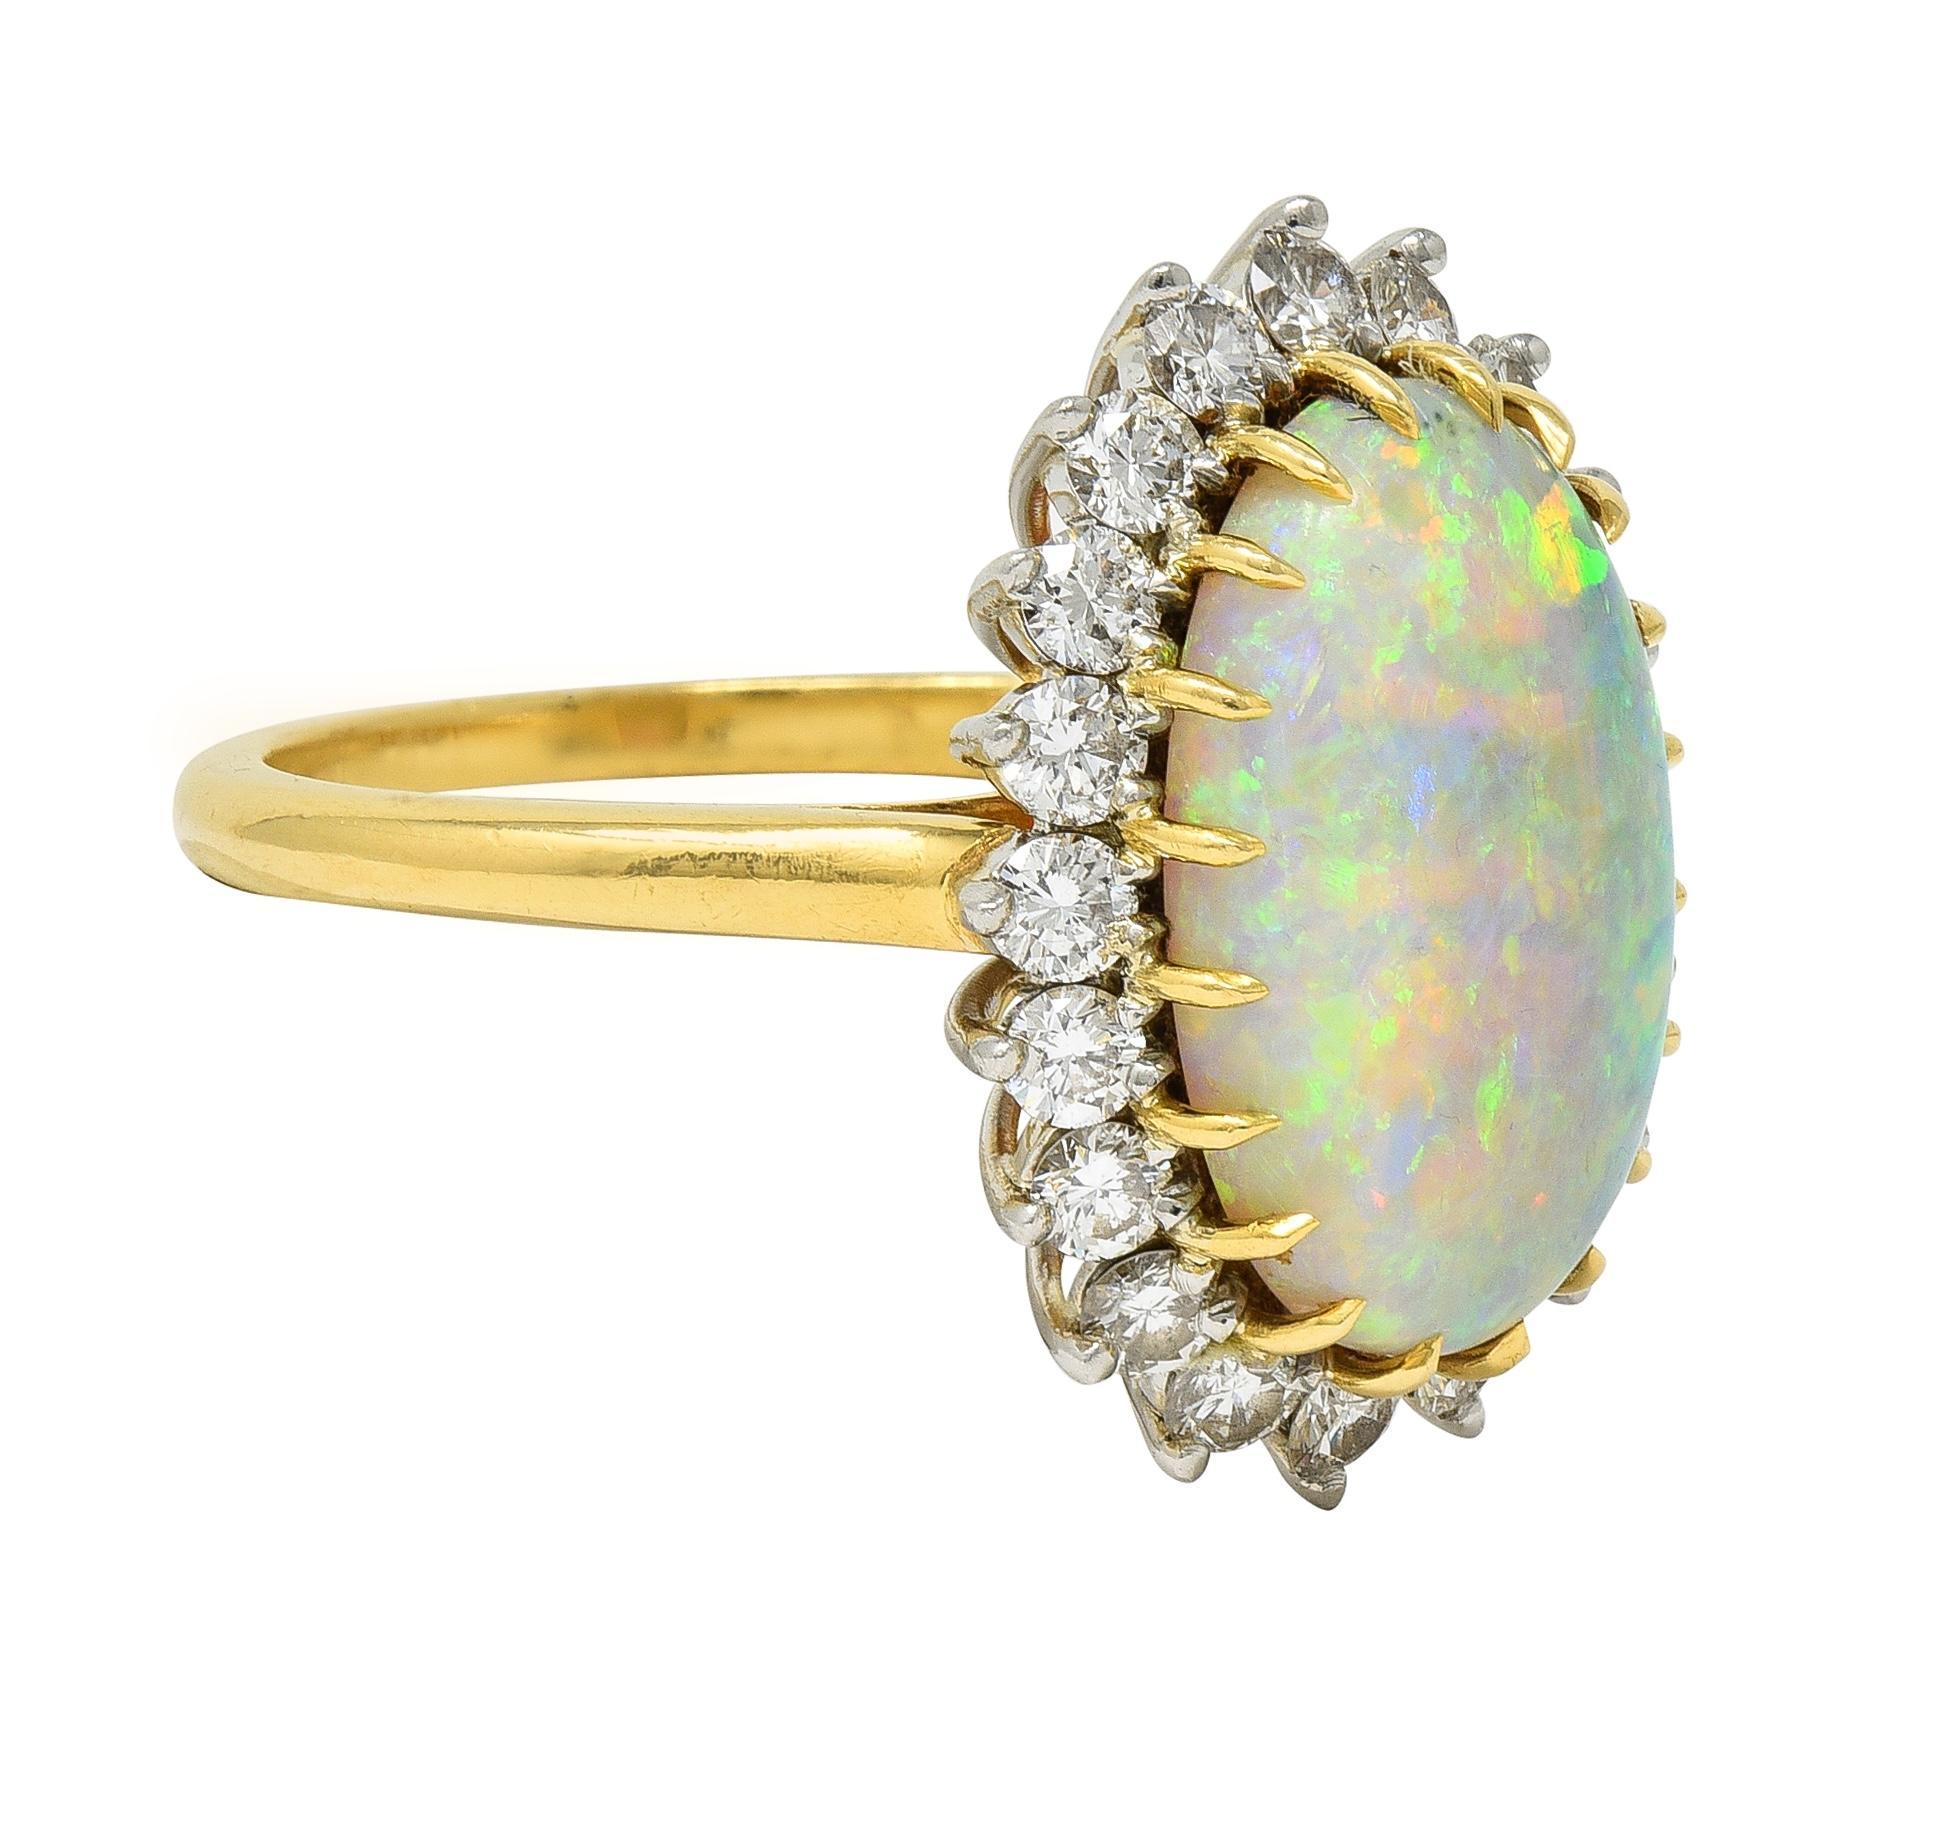 Centering an oval-shaped opal measuring 9.5 x 5.3 mm - translucent white in body color with spectral play-of-color
Set with yellow gold talon prongs with a recessed platinum halo surround of round brilliant cut diamonds 
Weighing approximately 0.80